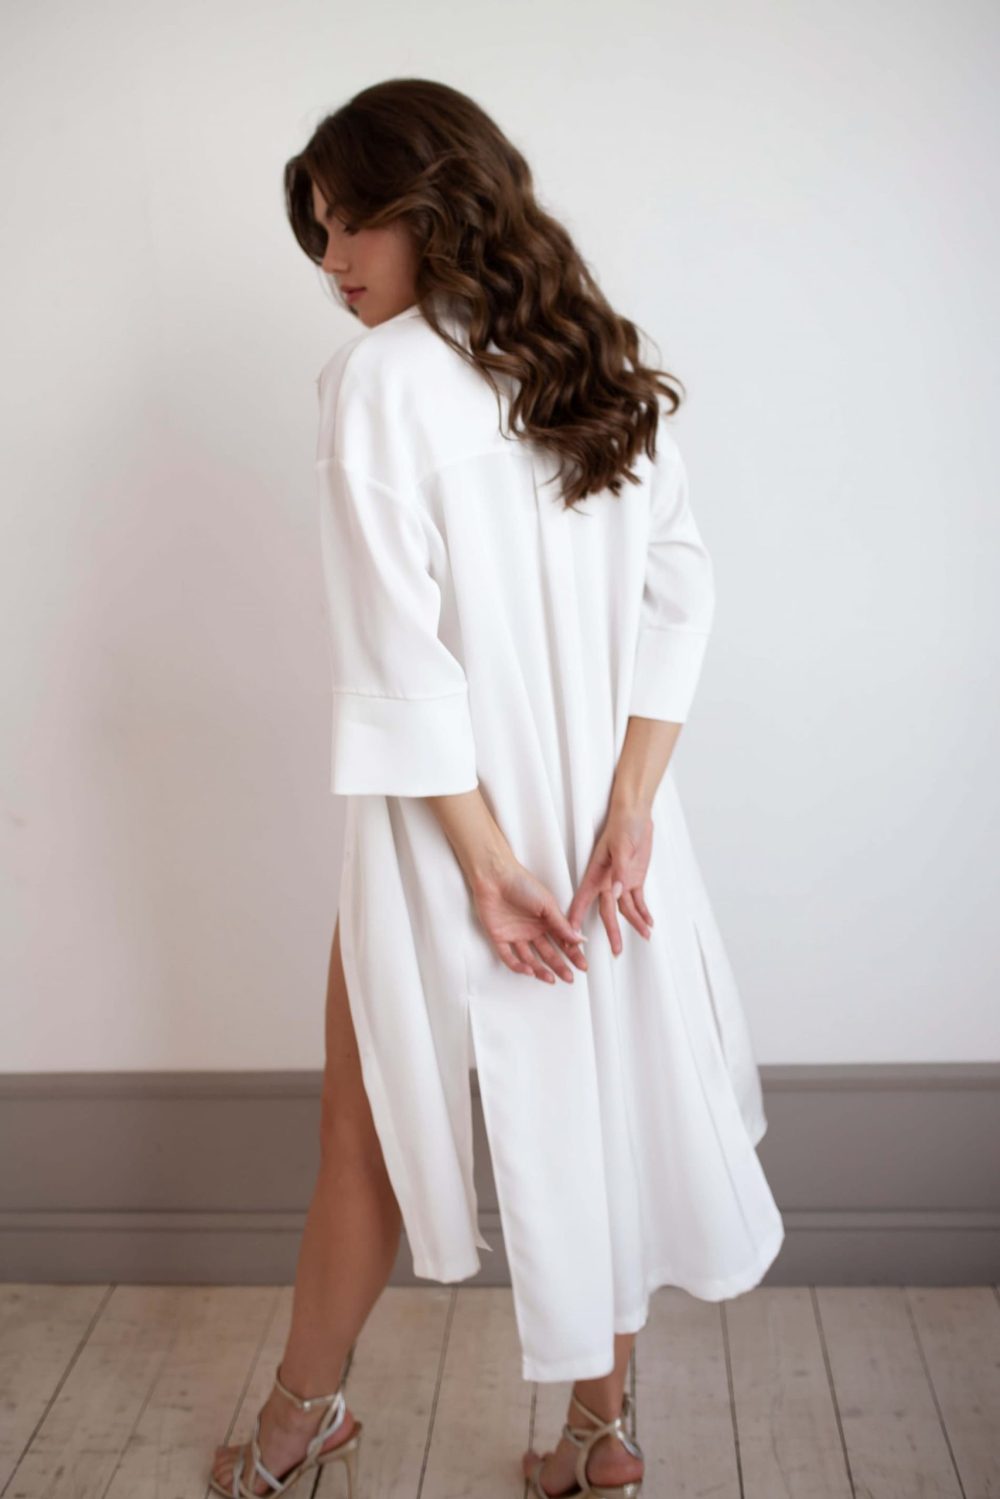 White Wedding robe-shirt Adriana with sleeves on the back, auckland, nz 2